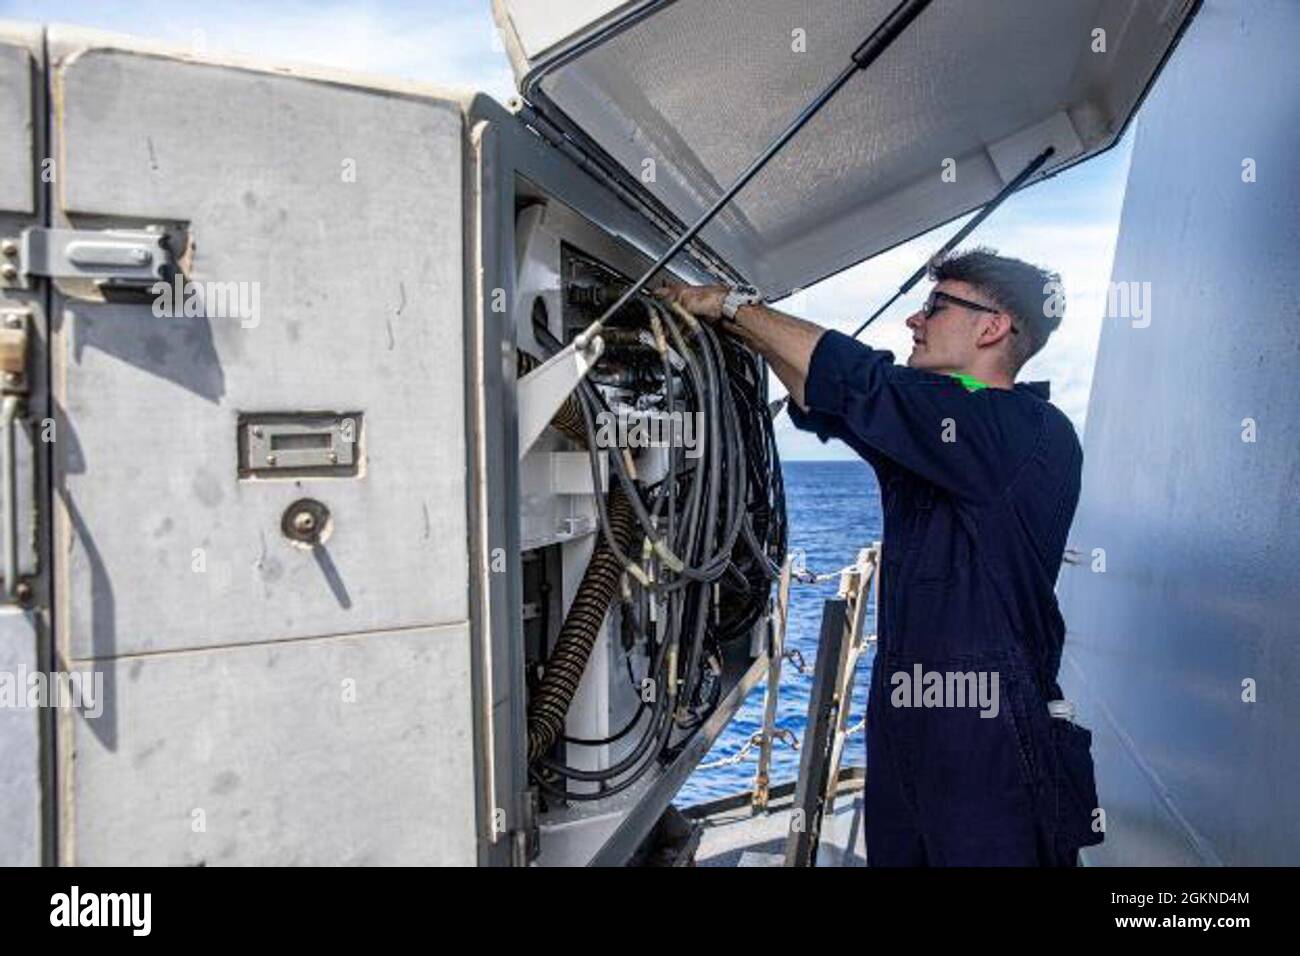 PACIFIC OCEAN (June 4, 2021) – Cryptologic Technician Technical 2nd Class Ryan Smith, from Cave Creek, Ariz., conducts maintenance on an SLQ-32 electronic warfare suite aboard the Arleigh Burke-class guided-missile destroyer USS Halsey (DDG 97). Halsey is attached to Commander, Task Force 70/Carrier Strike Group 5 conducting underway operations in support of a free and open Indo-Pacific. Stock Photo